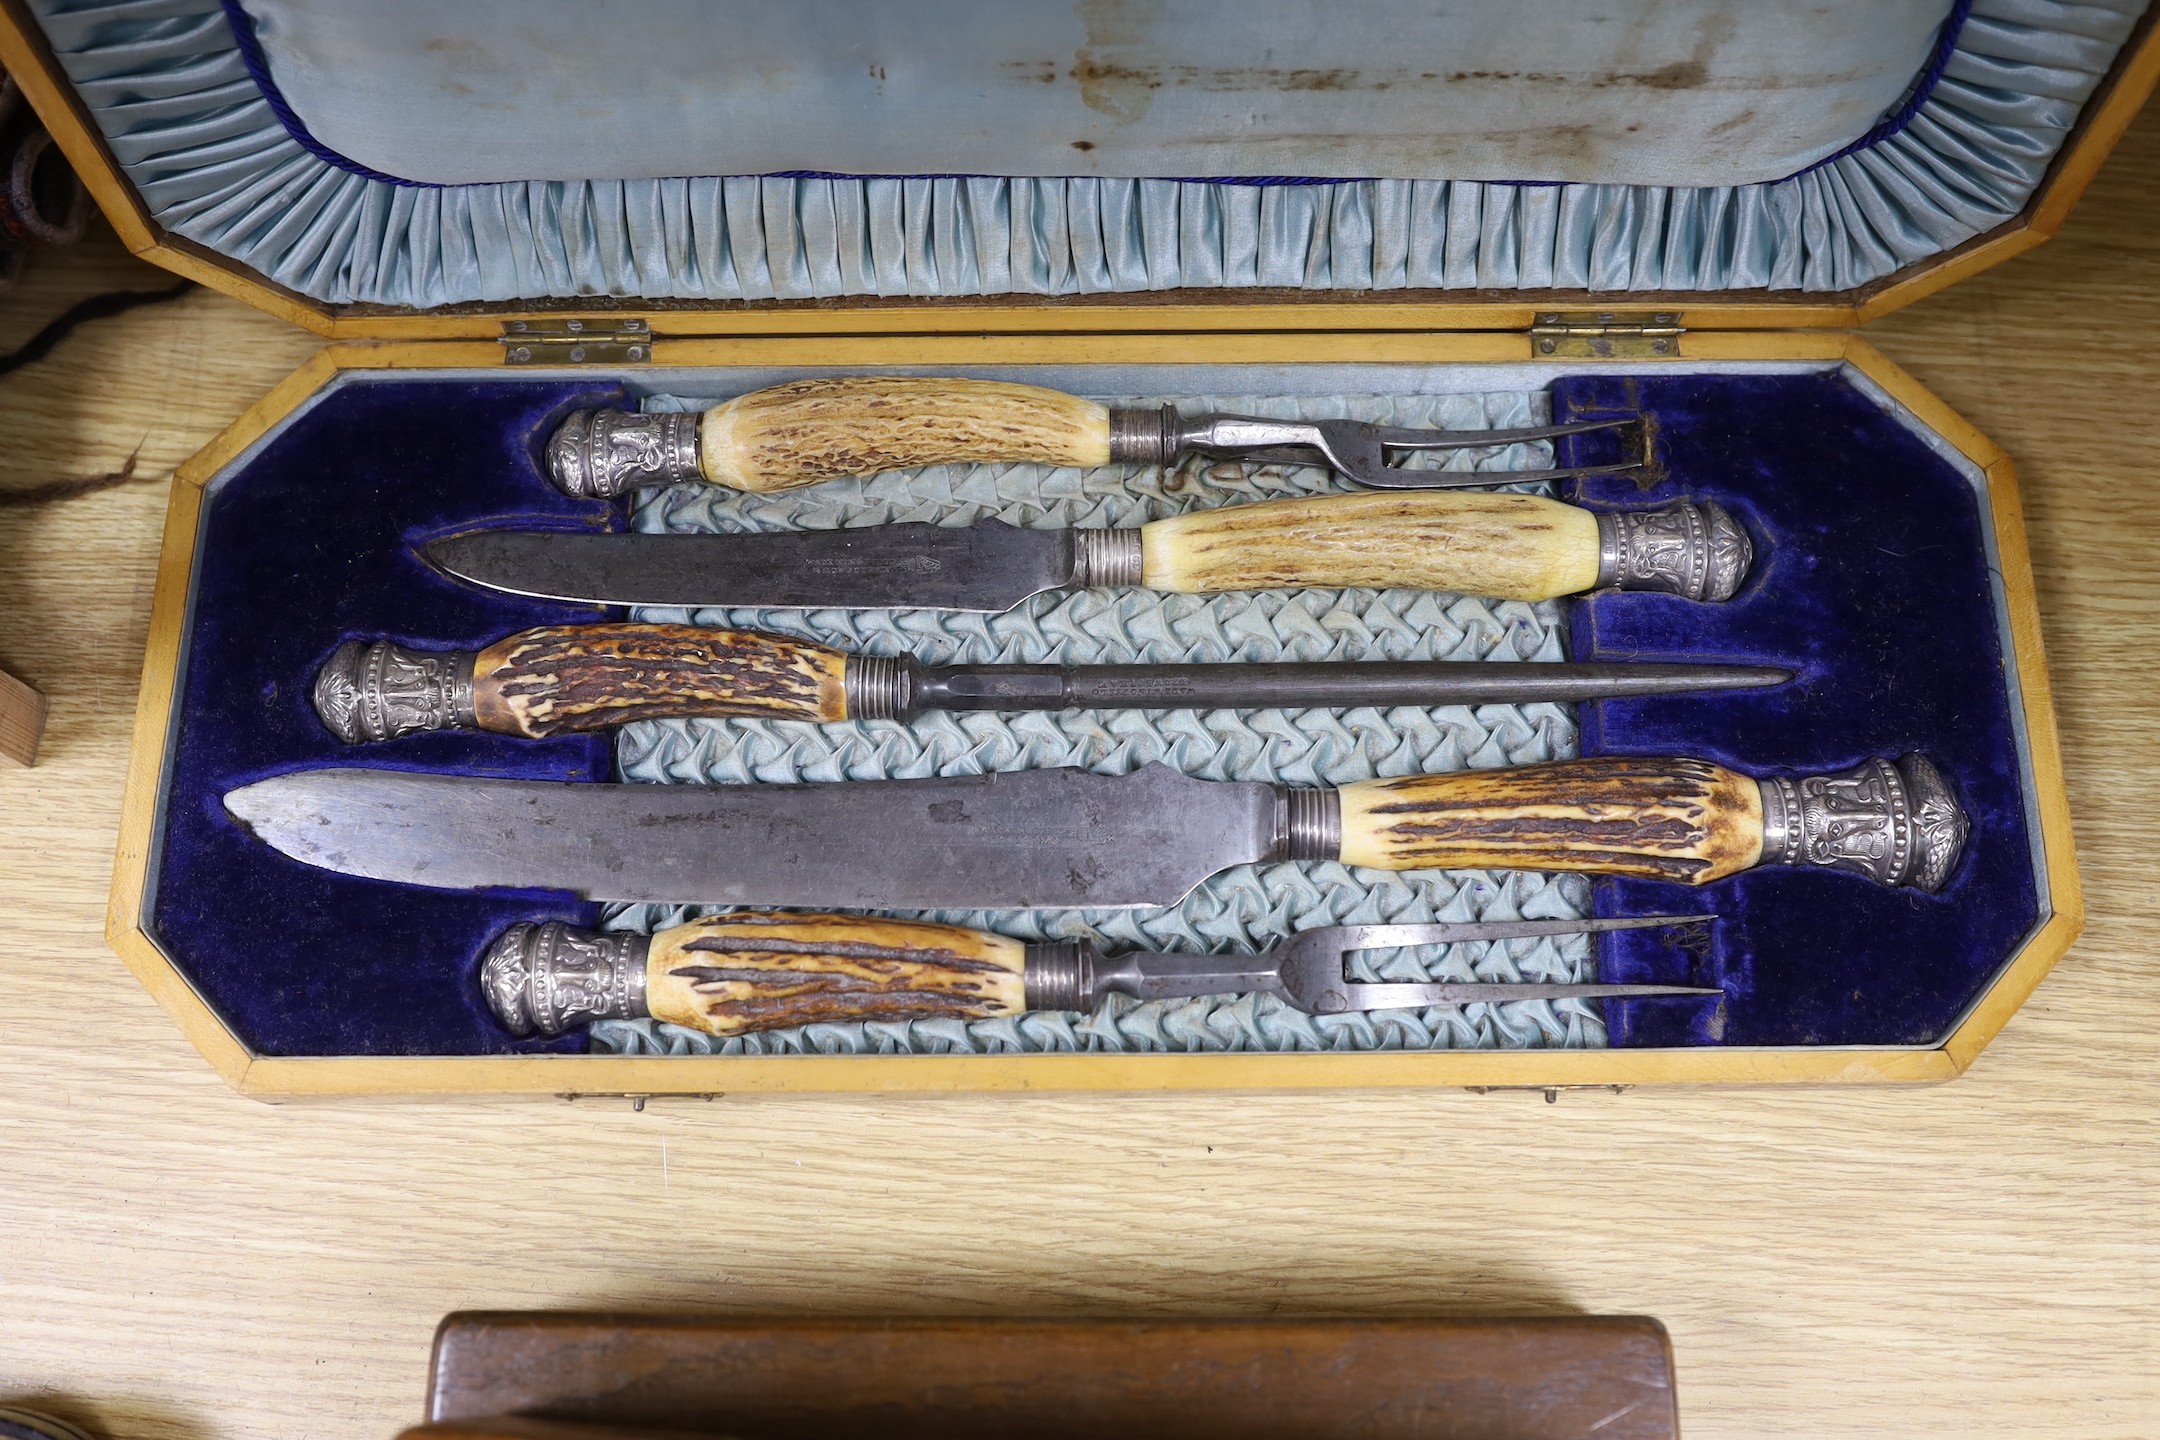 Four cased plated sets and a 19th-century burr walnut box